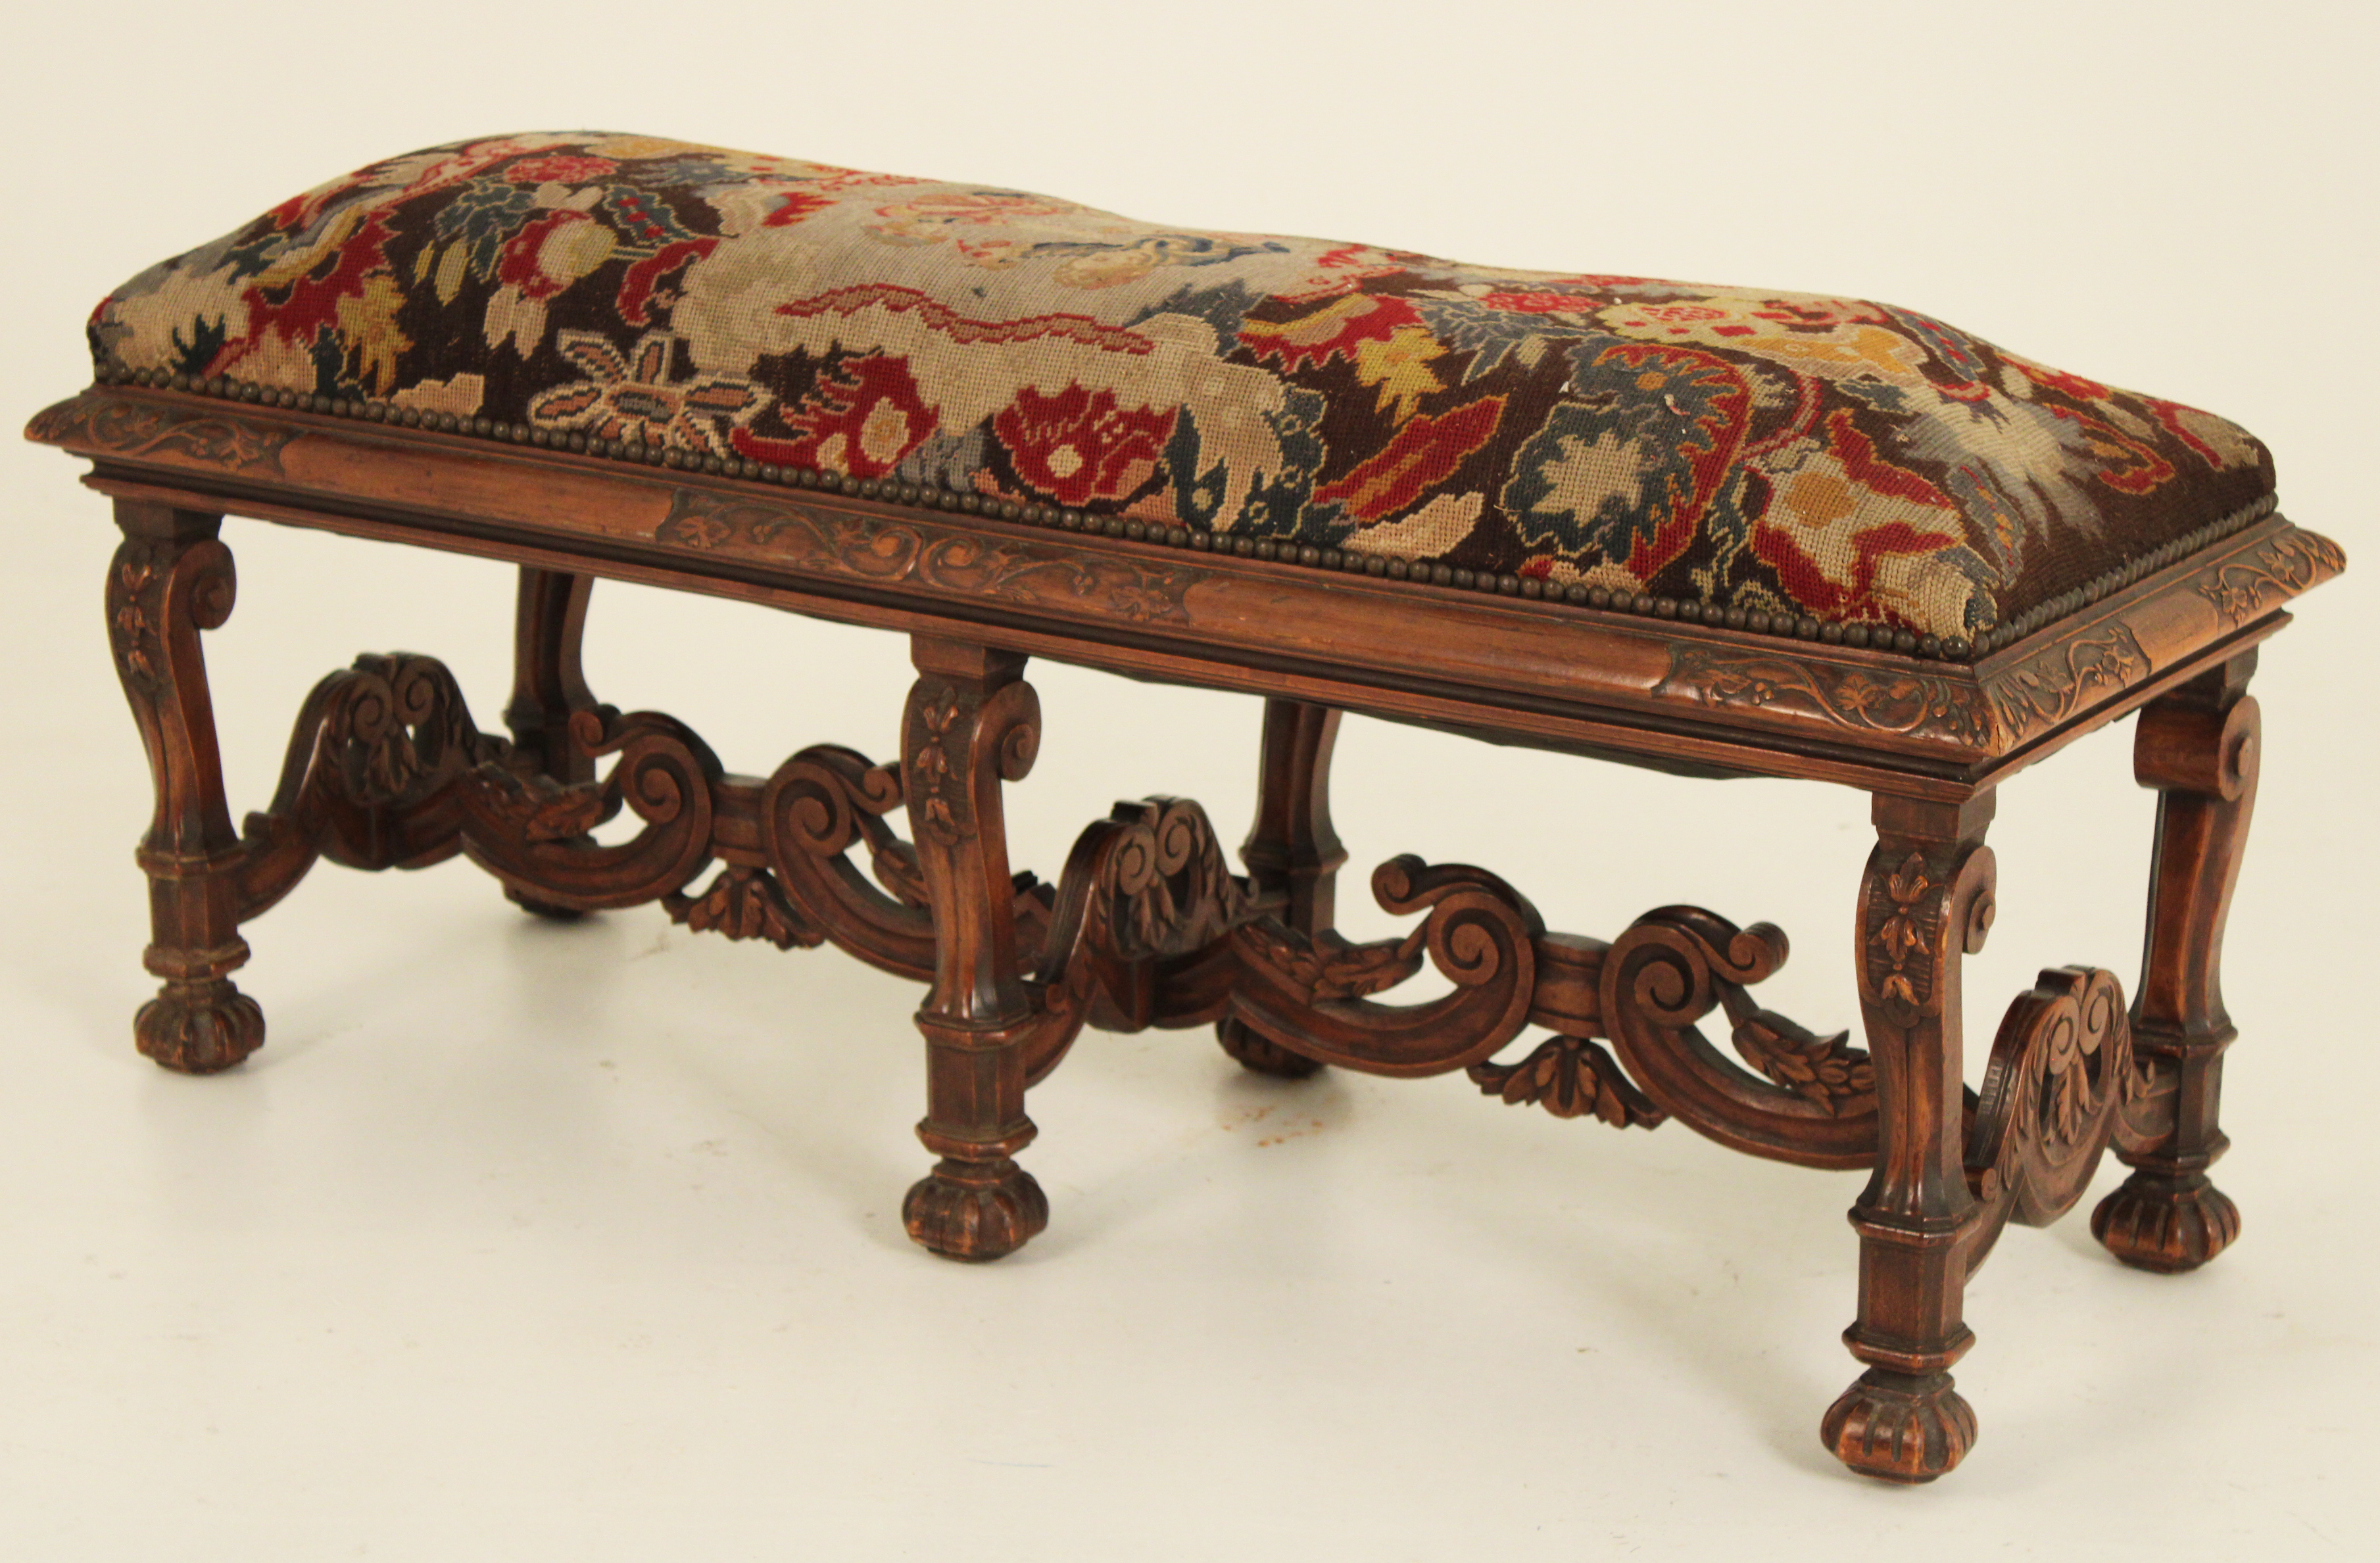 WILLIAM AND MARY STYLE WALNUT BENCH